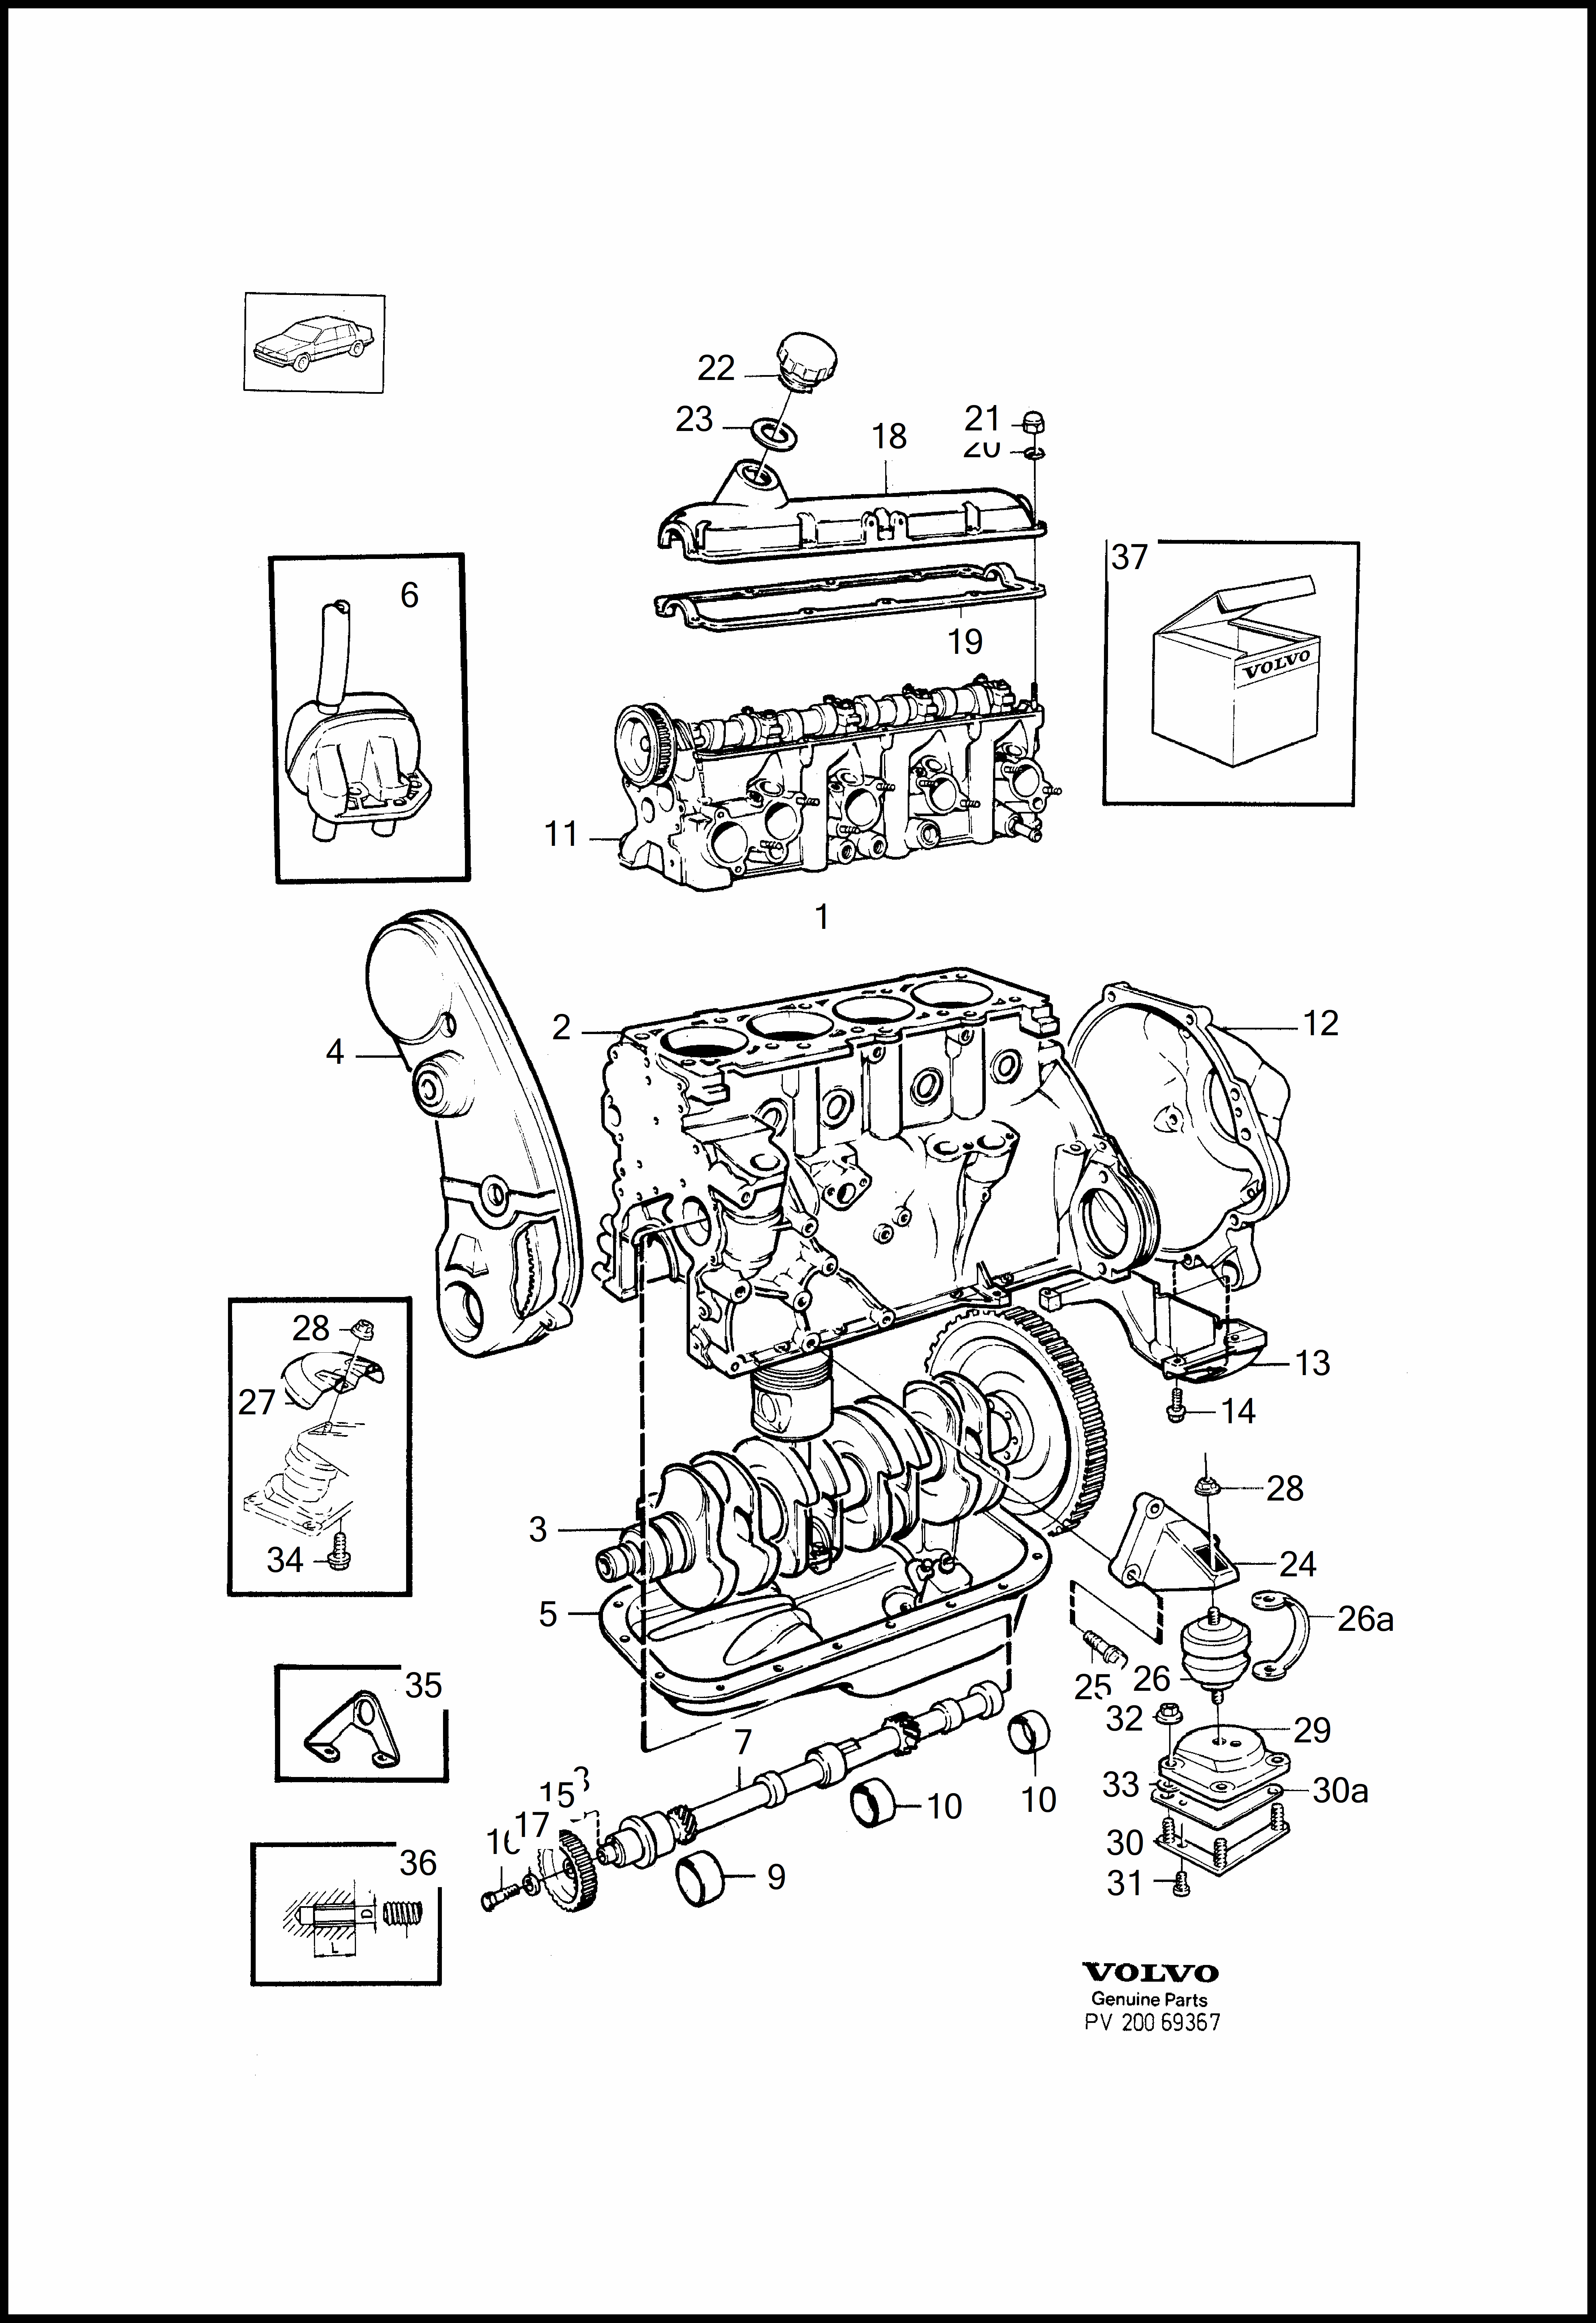 engine with fittings per Volvo 760 760